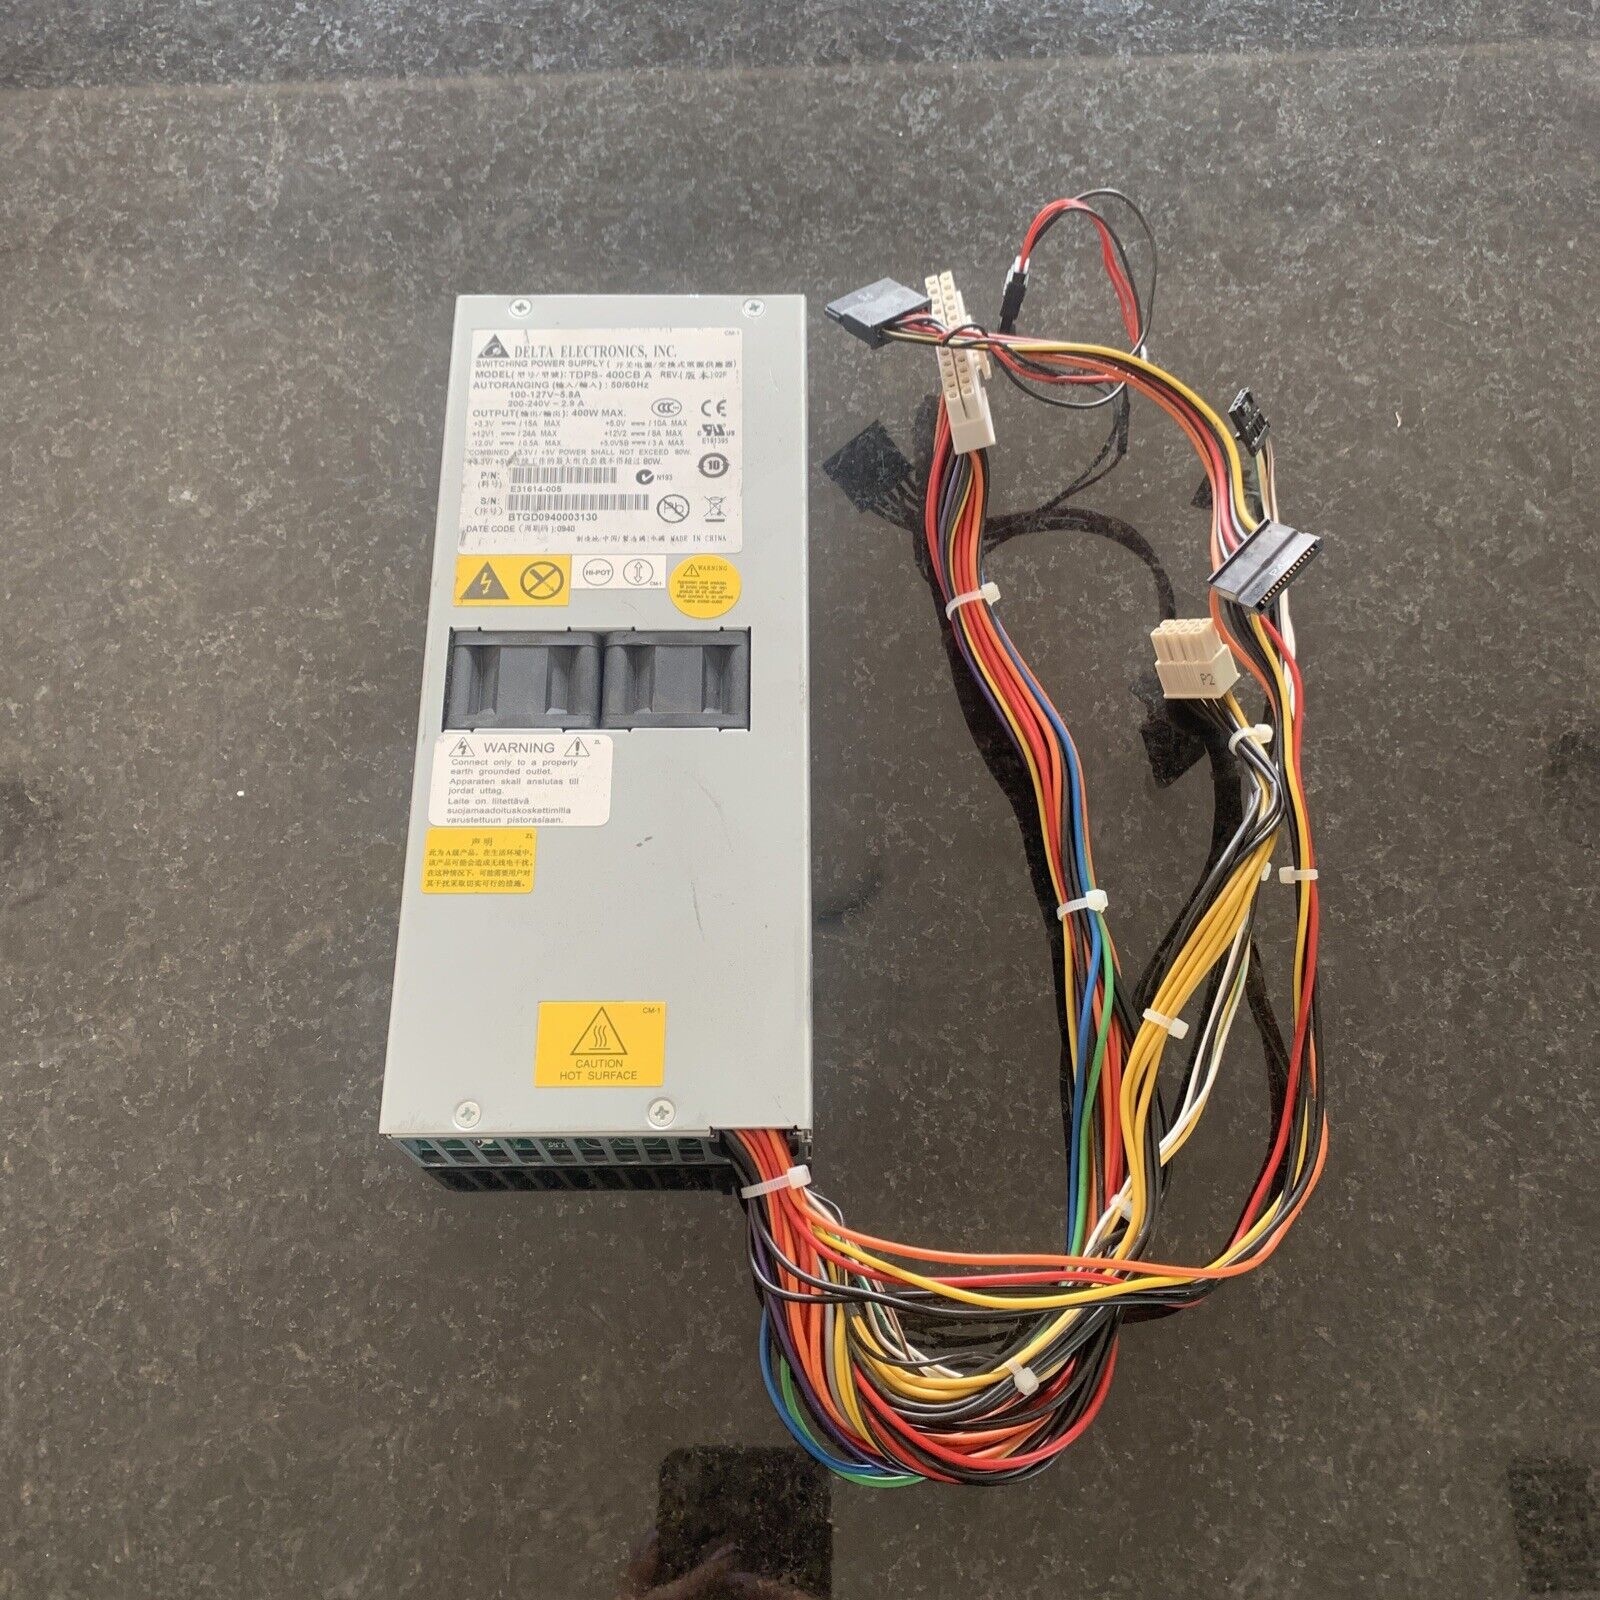 DELTA ELECTRONICS INC. TDPS-400CB A 650W SWITCHING POWER SUPPLY